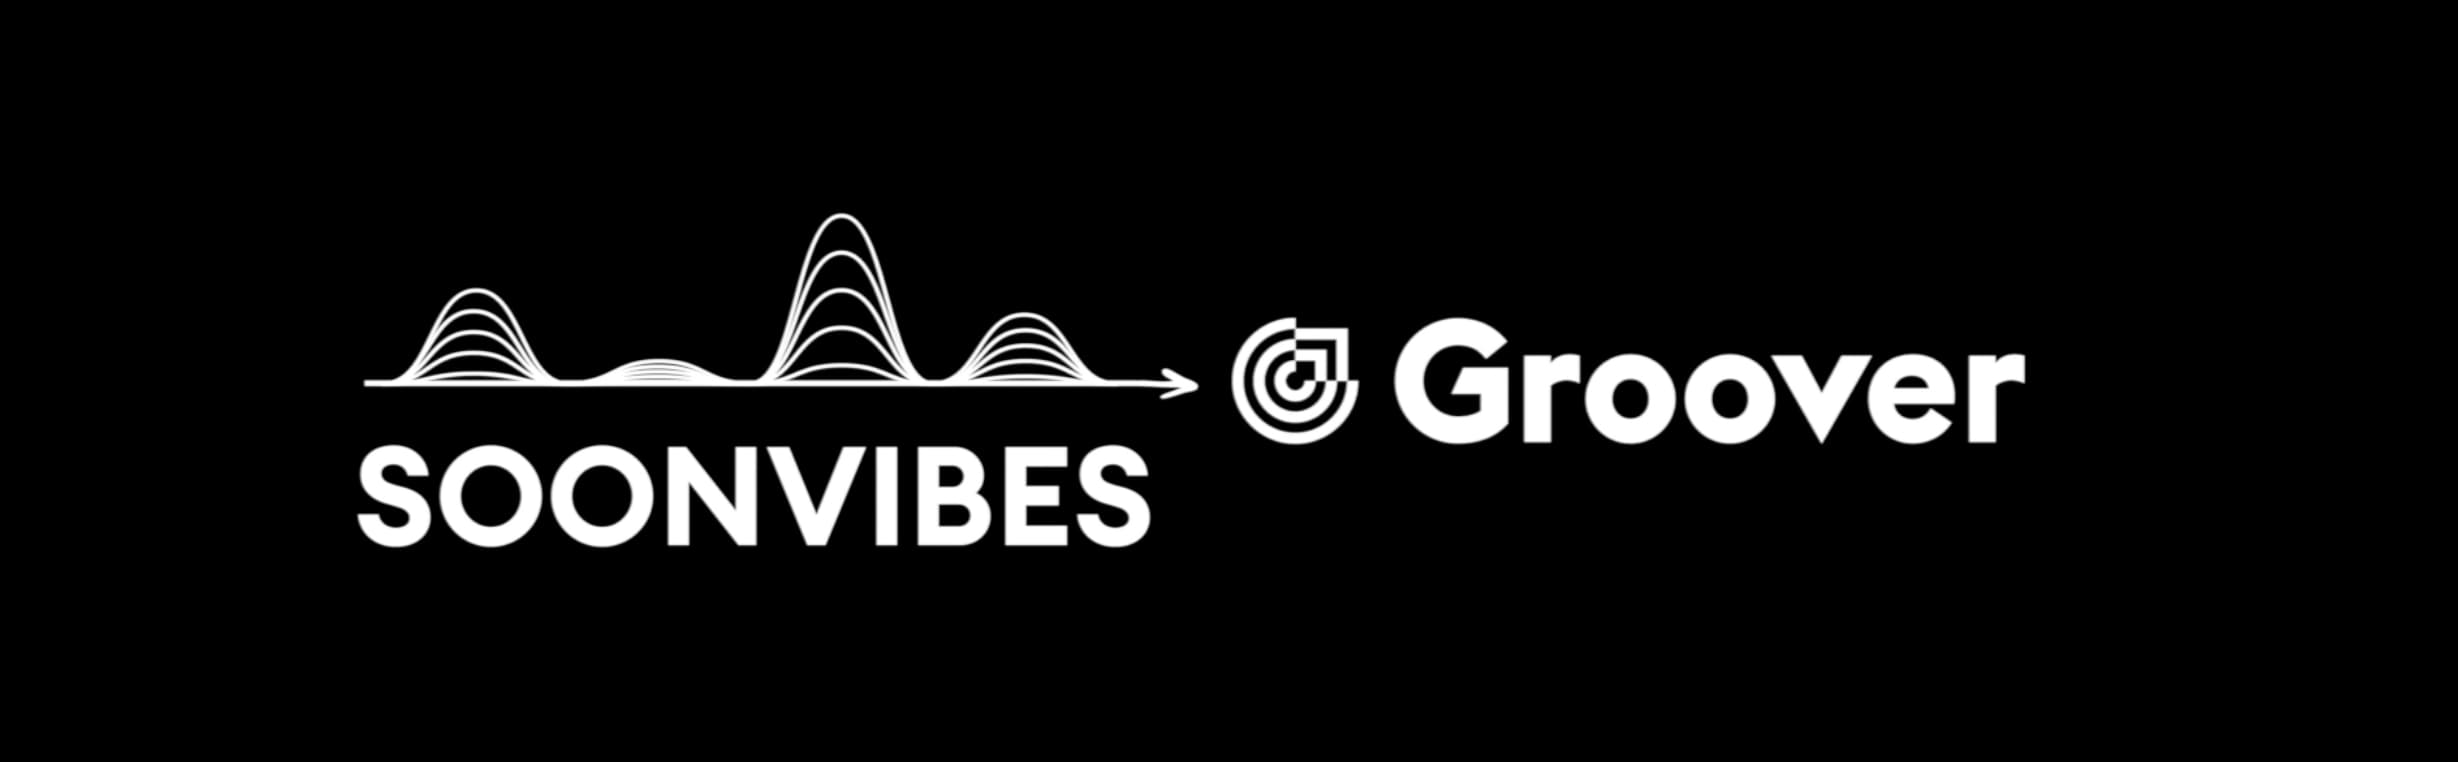 It's official as of March 31, 2021, Groover acquires Soonvibes and accelerates in electronic music